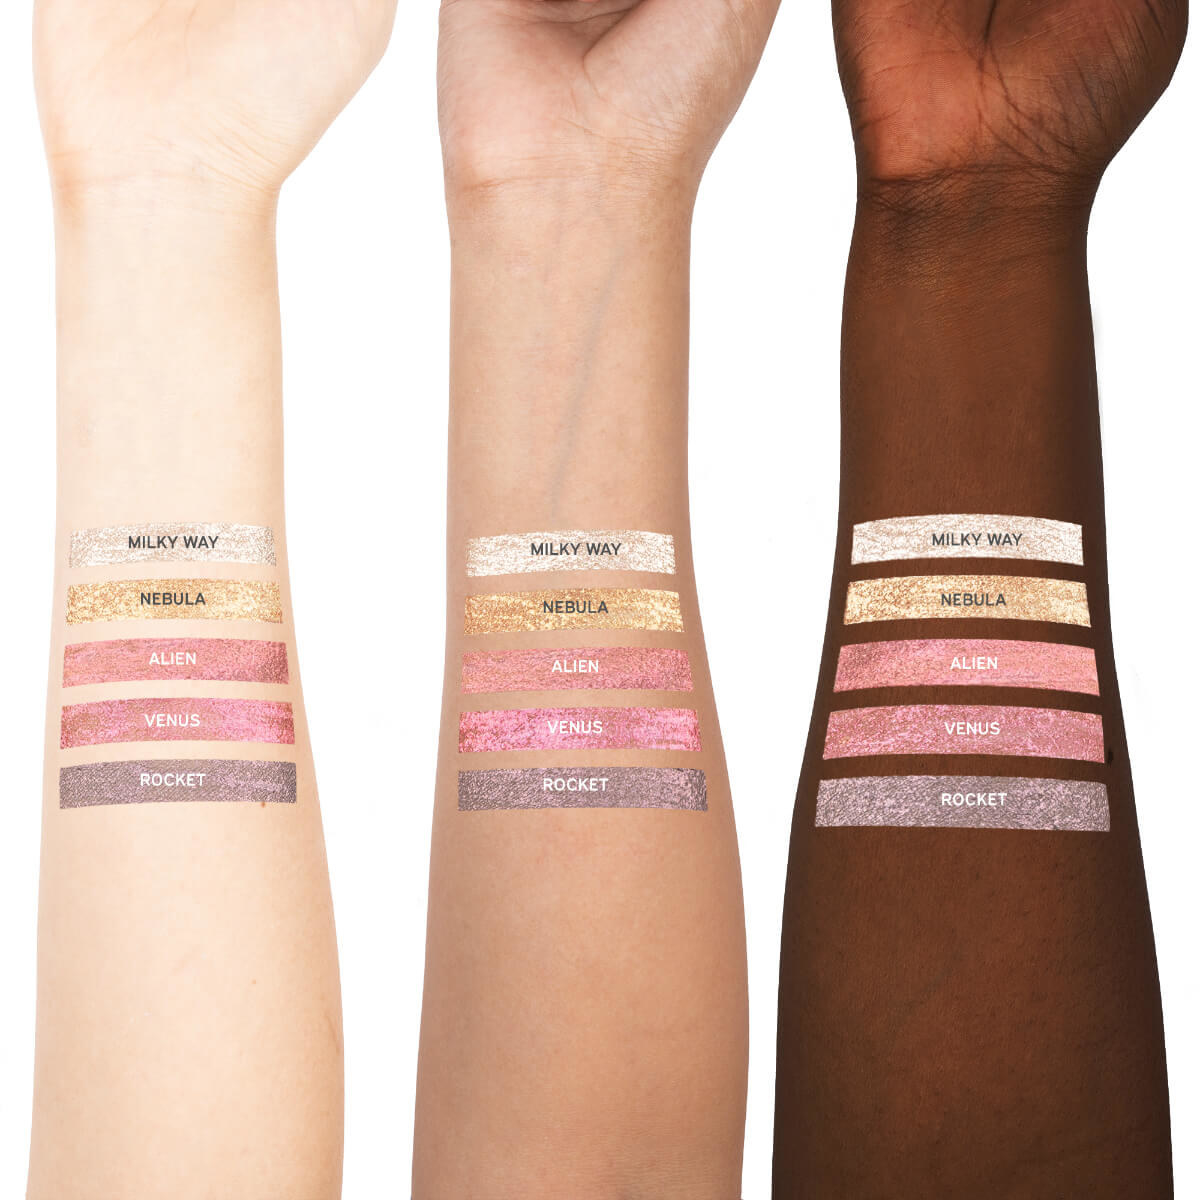 Swatches of four of the metallic shades: white gold, two pinks, and a taupe